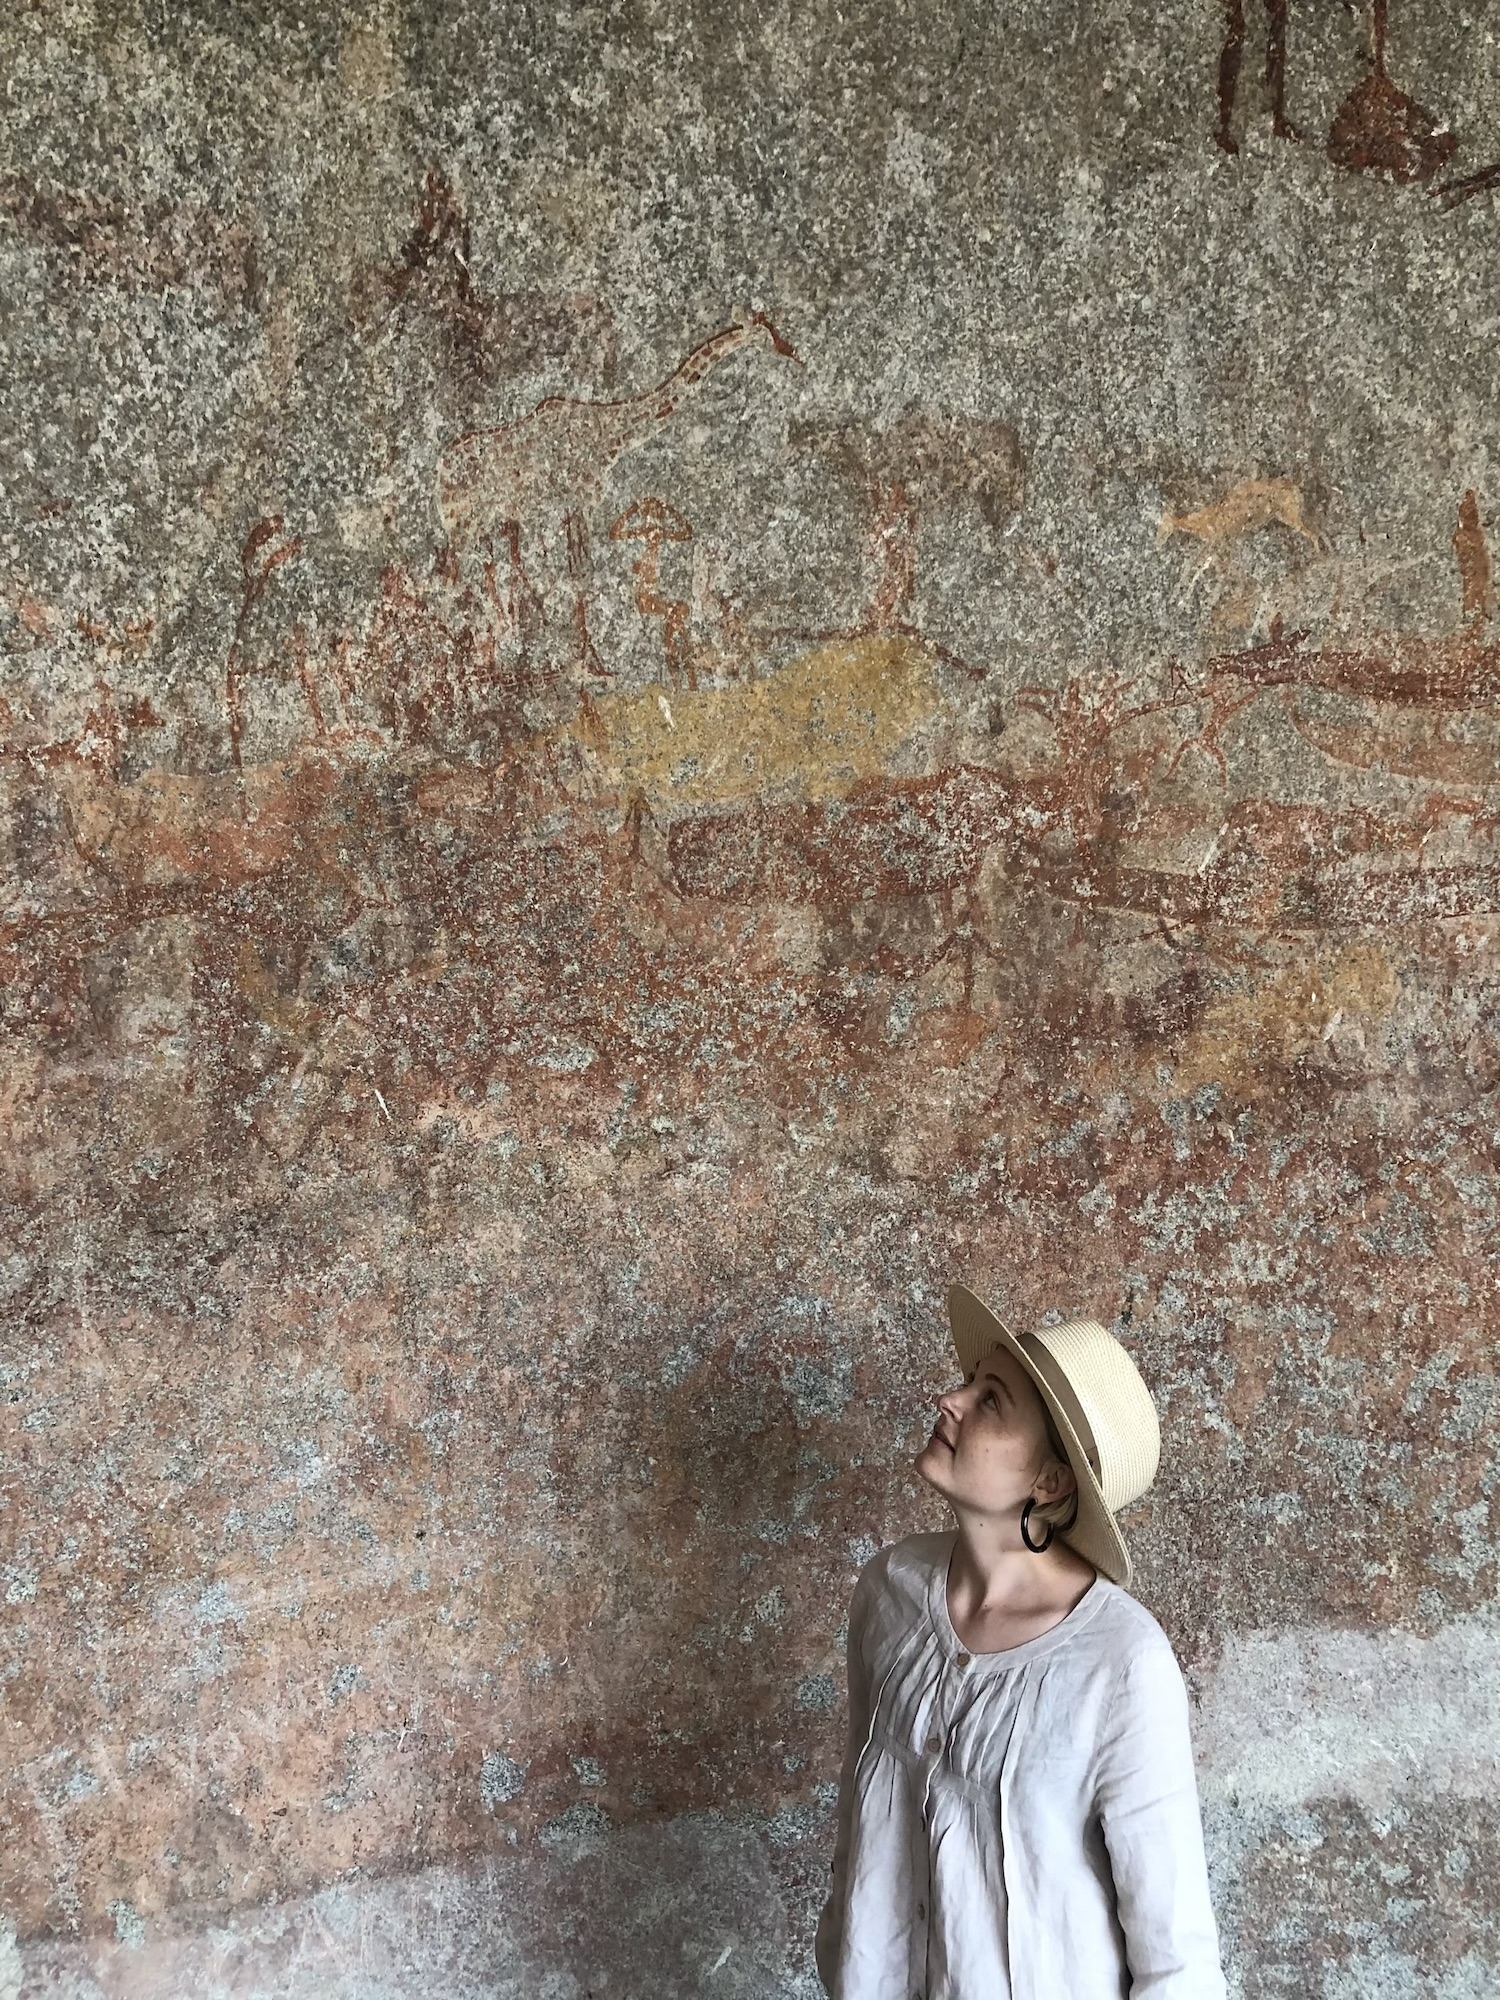 Whitney Jade Halstead in Zimbabwe visiting some ancient rock art, 2021